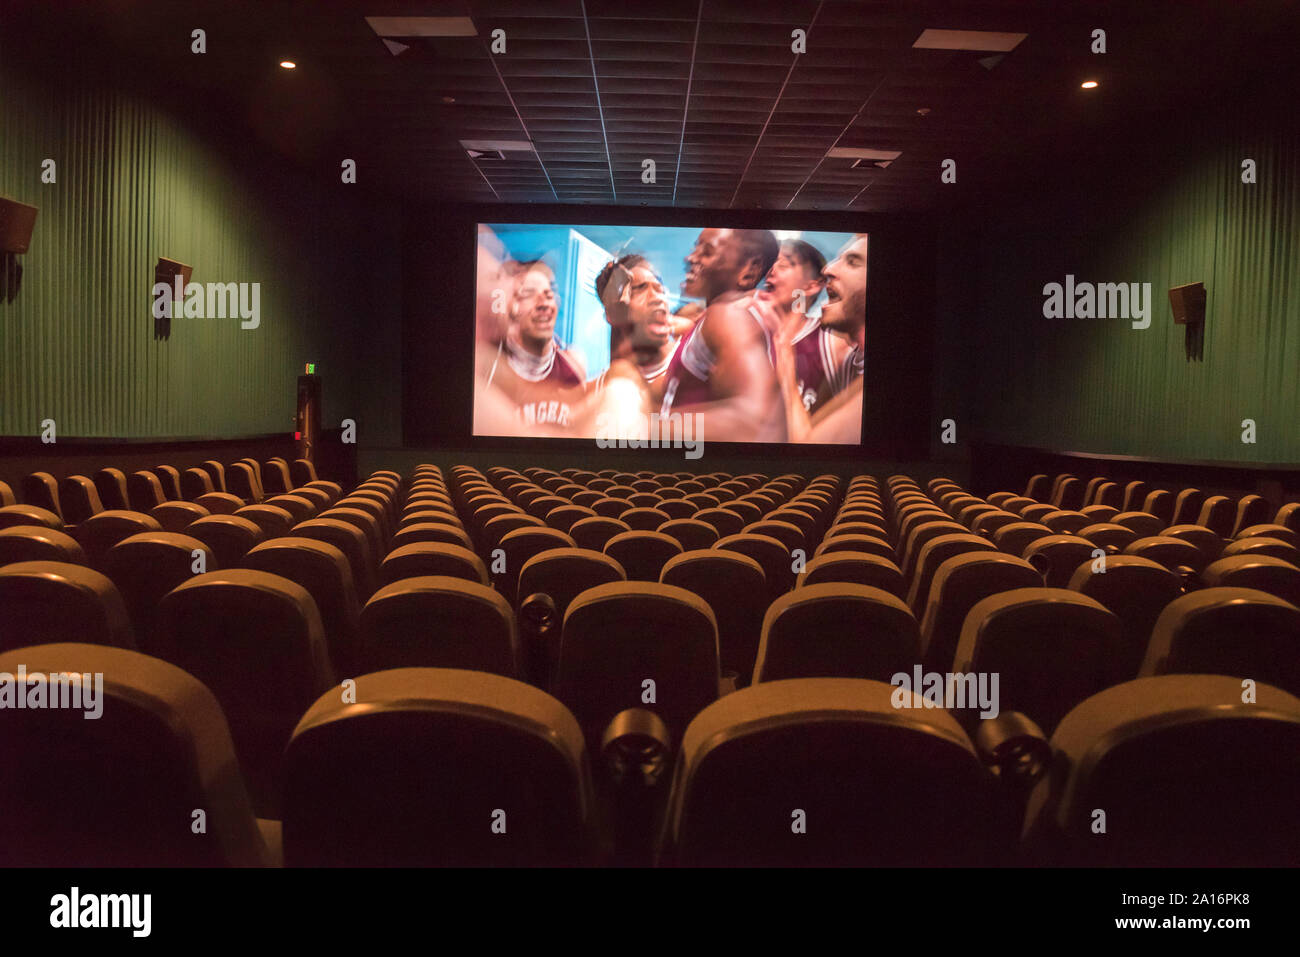 Movie theater interior showing screen and empty seats. Stock Photo